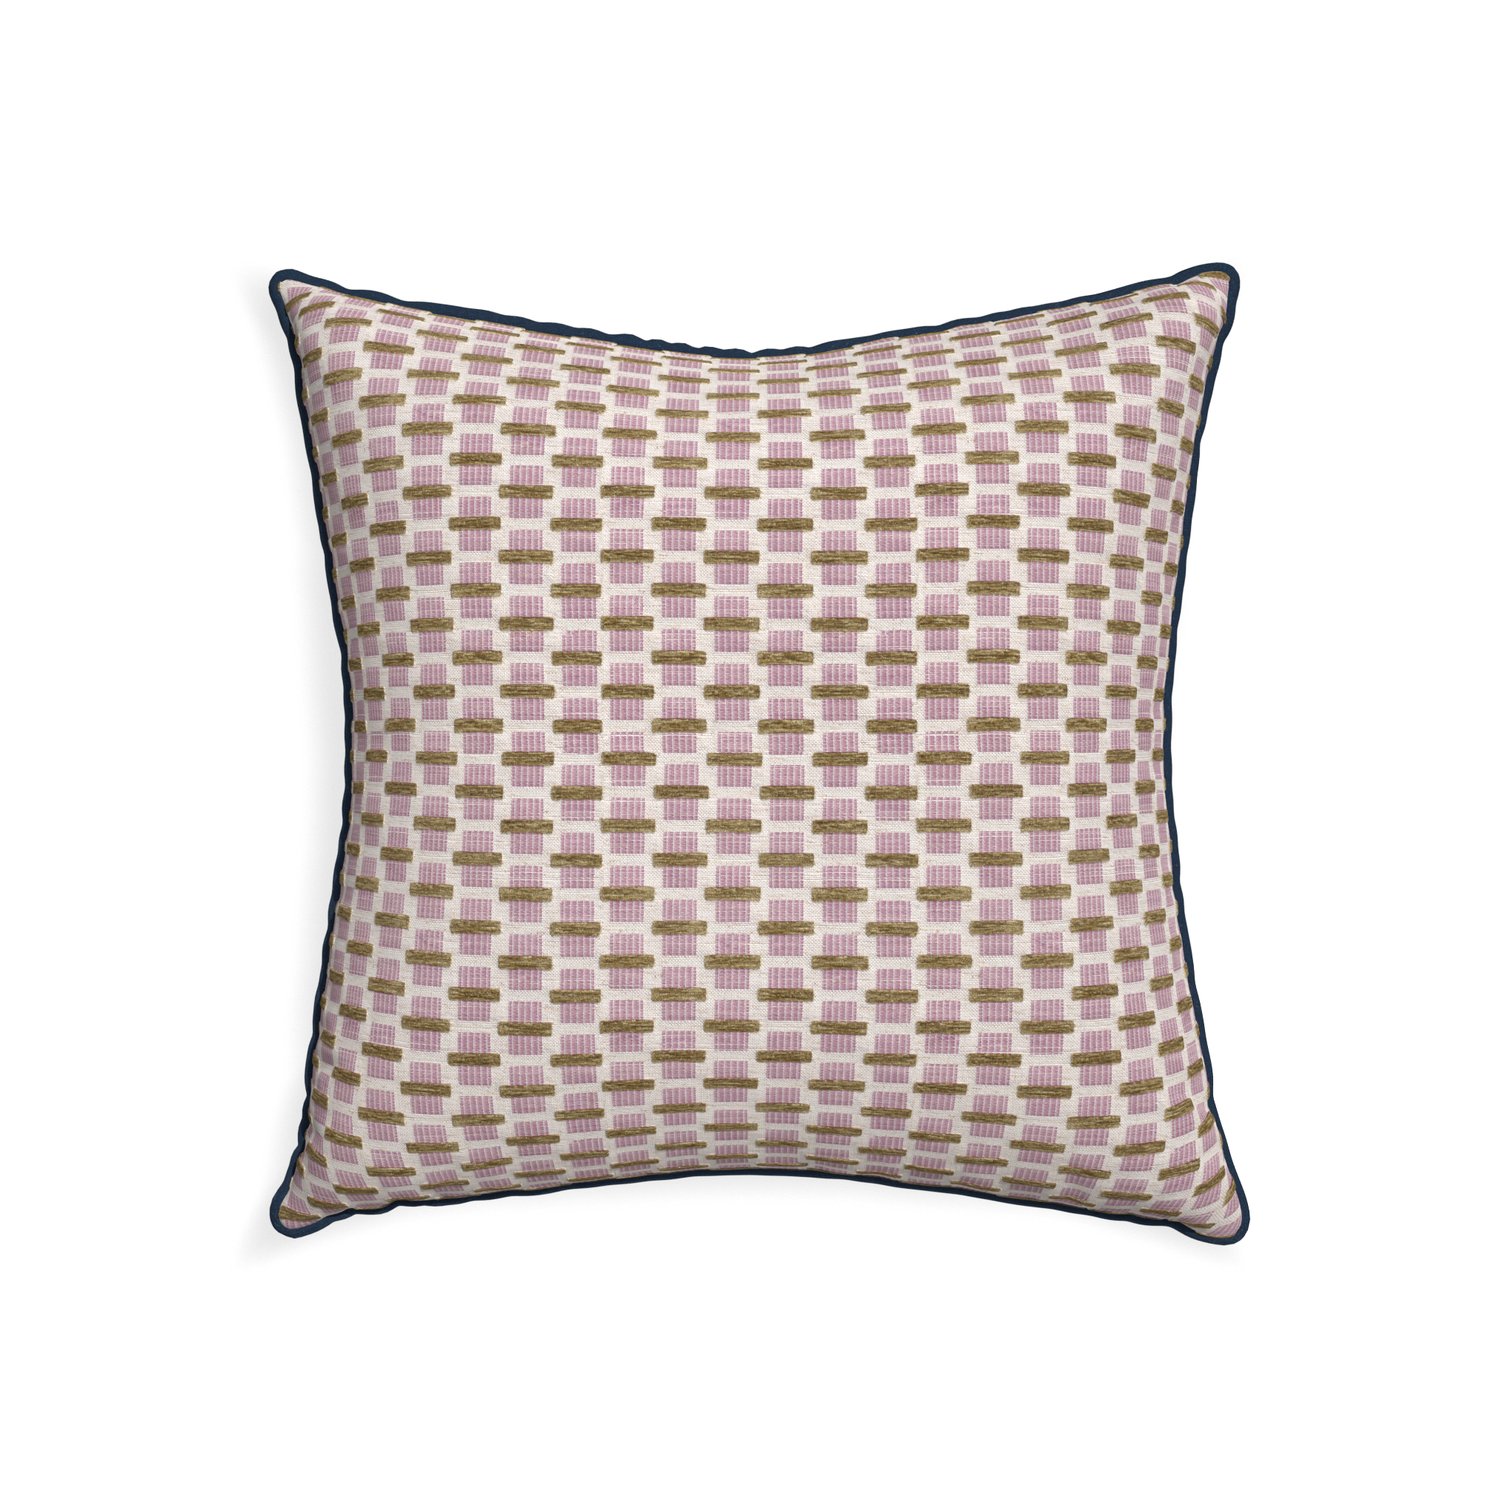 22-square willow orchid custom pink geometric chenillepillow with c piping on white background